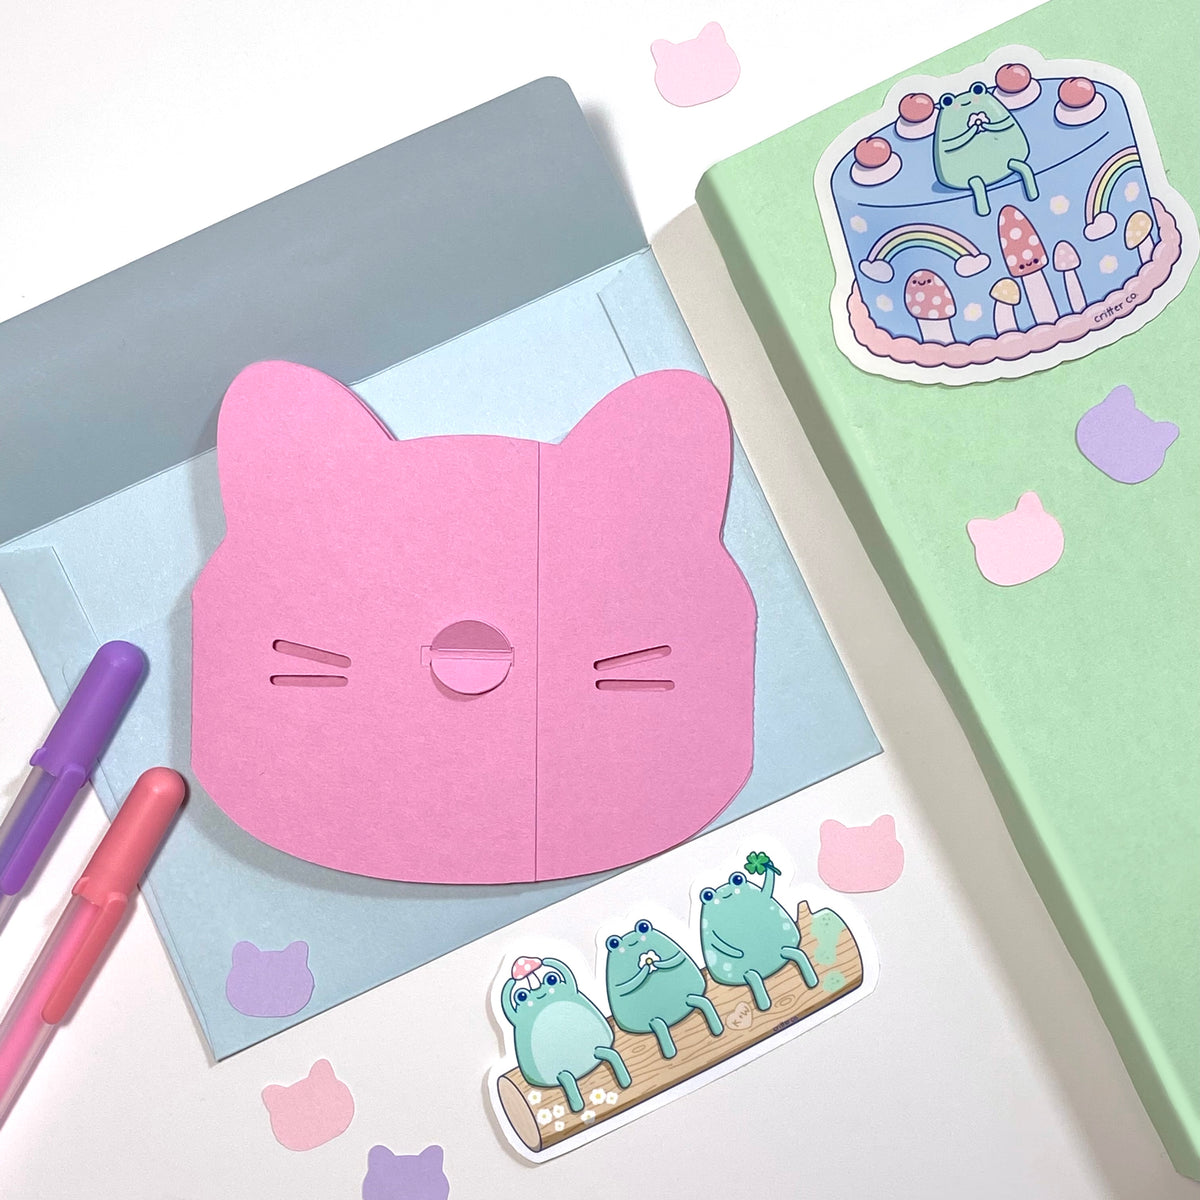 Kawaii stickers on journal with a die cut cat card. The custom digital art stickers are bright pastel colors surrounded by office supplies and cute confetti. Critter Co. brand name is on the stickers.